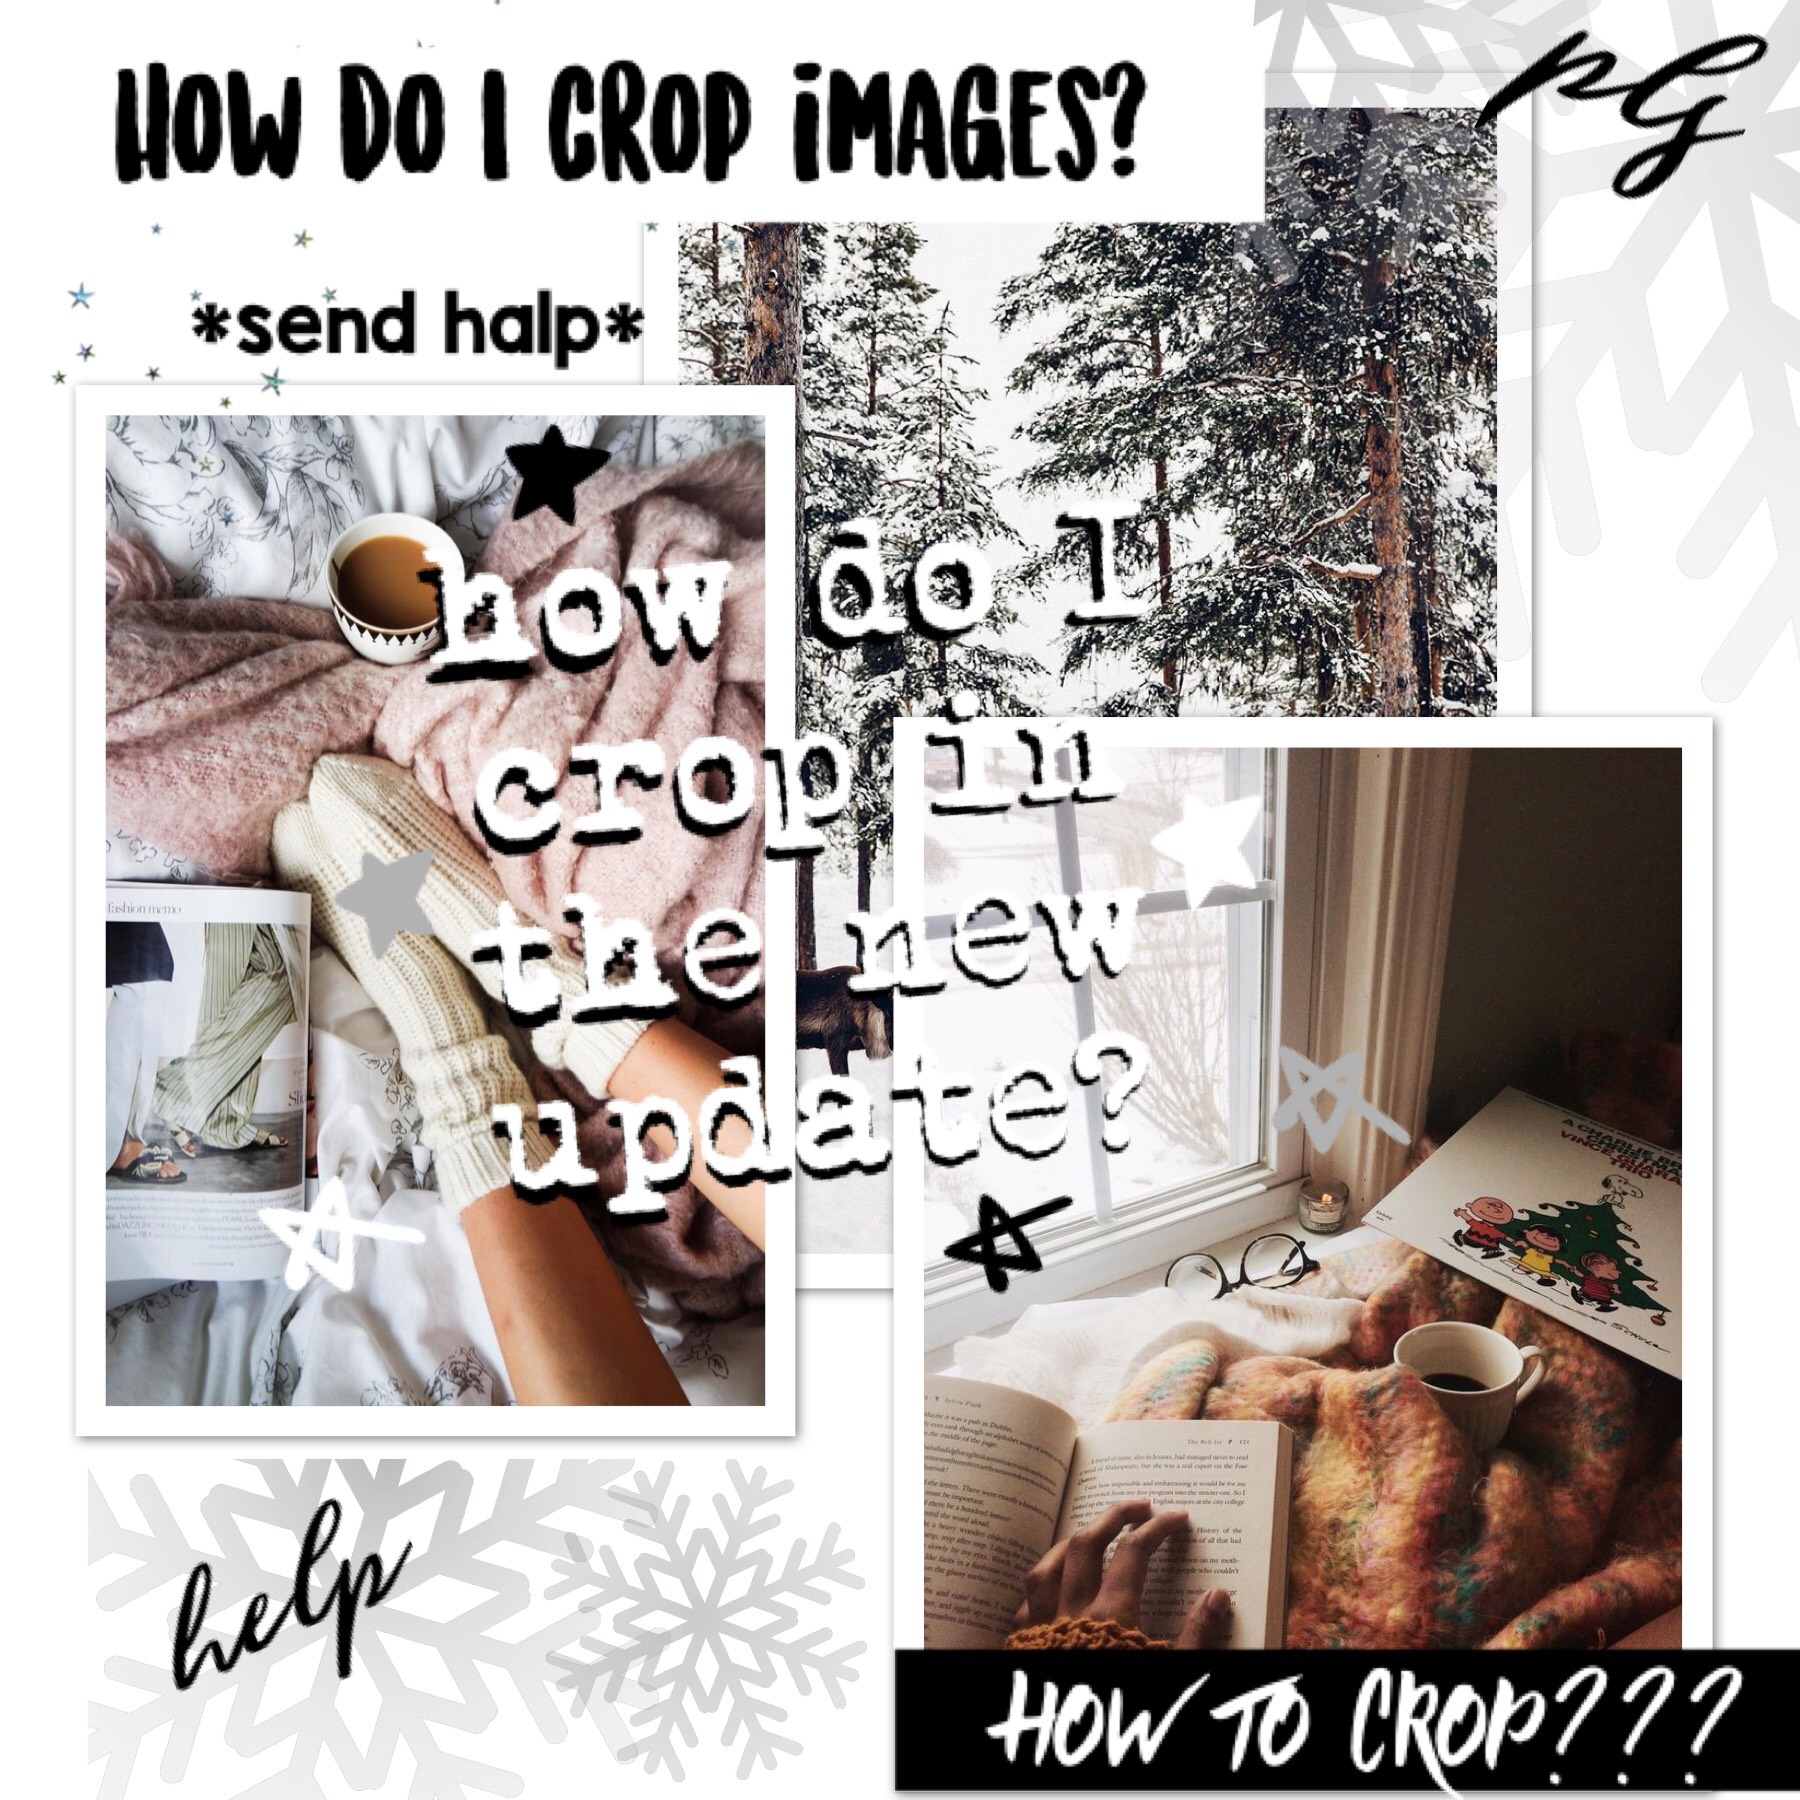 I just went to make a collage but I can’t crop images anymore! Can anyone help me? Is the crop feature gone??!?!